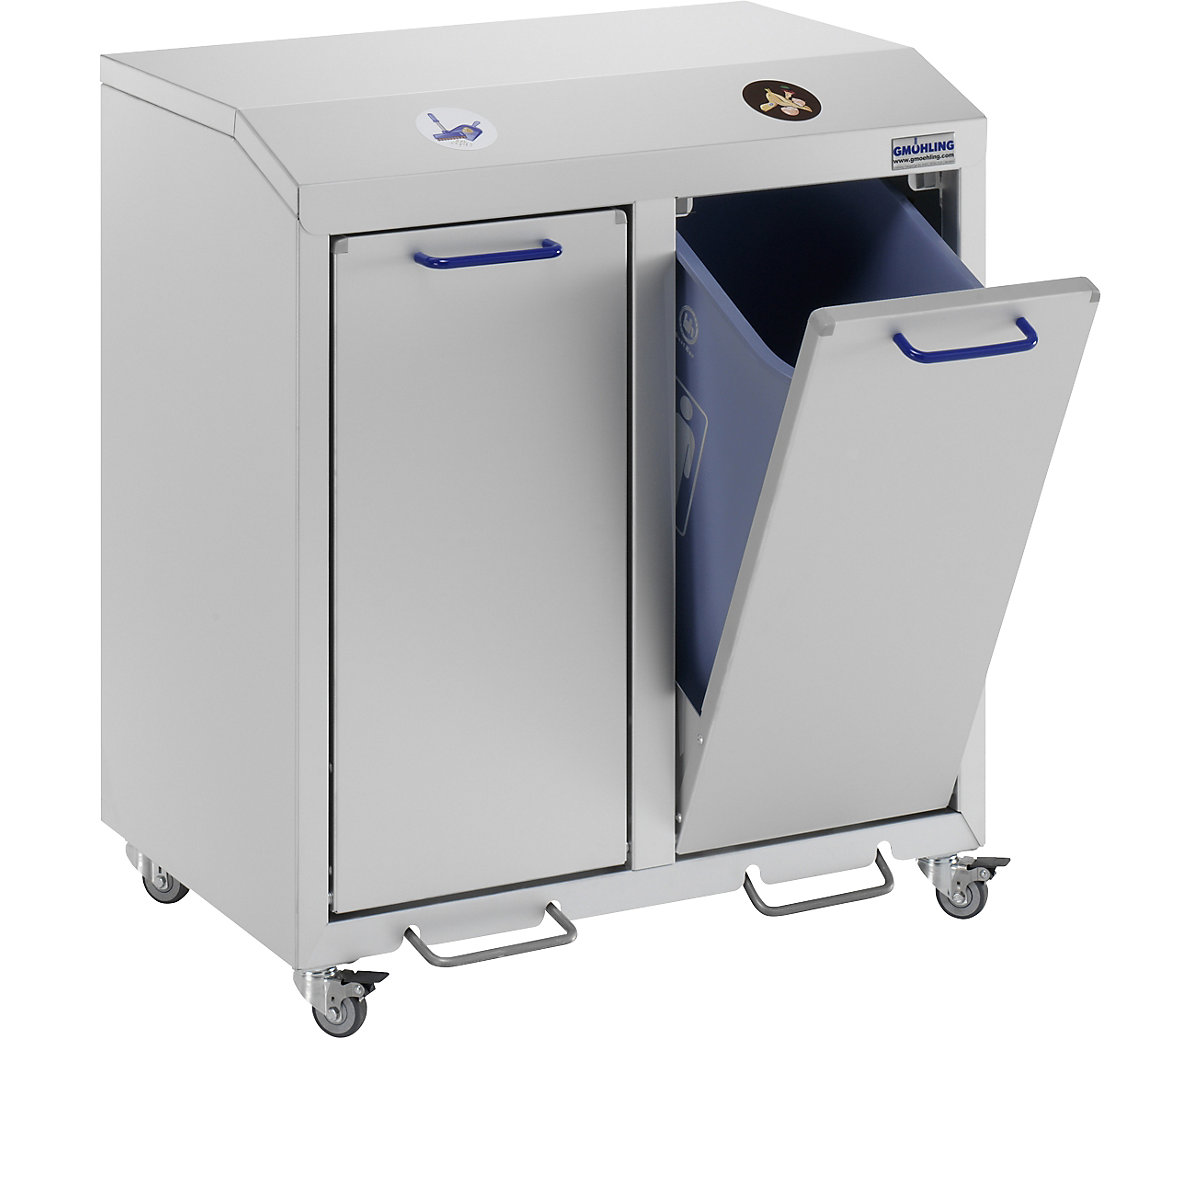 G®-COLLECT aluminium recyclable waste collector – Gmöhling